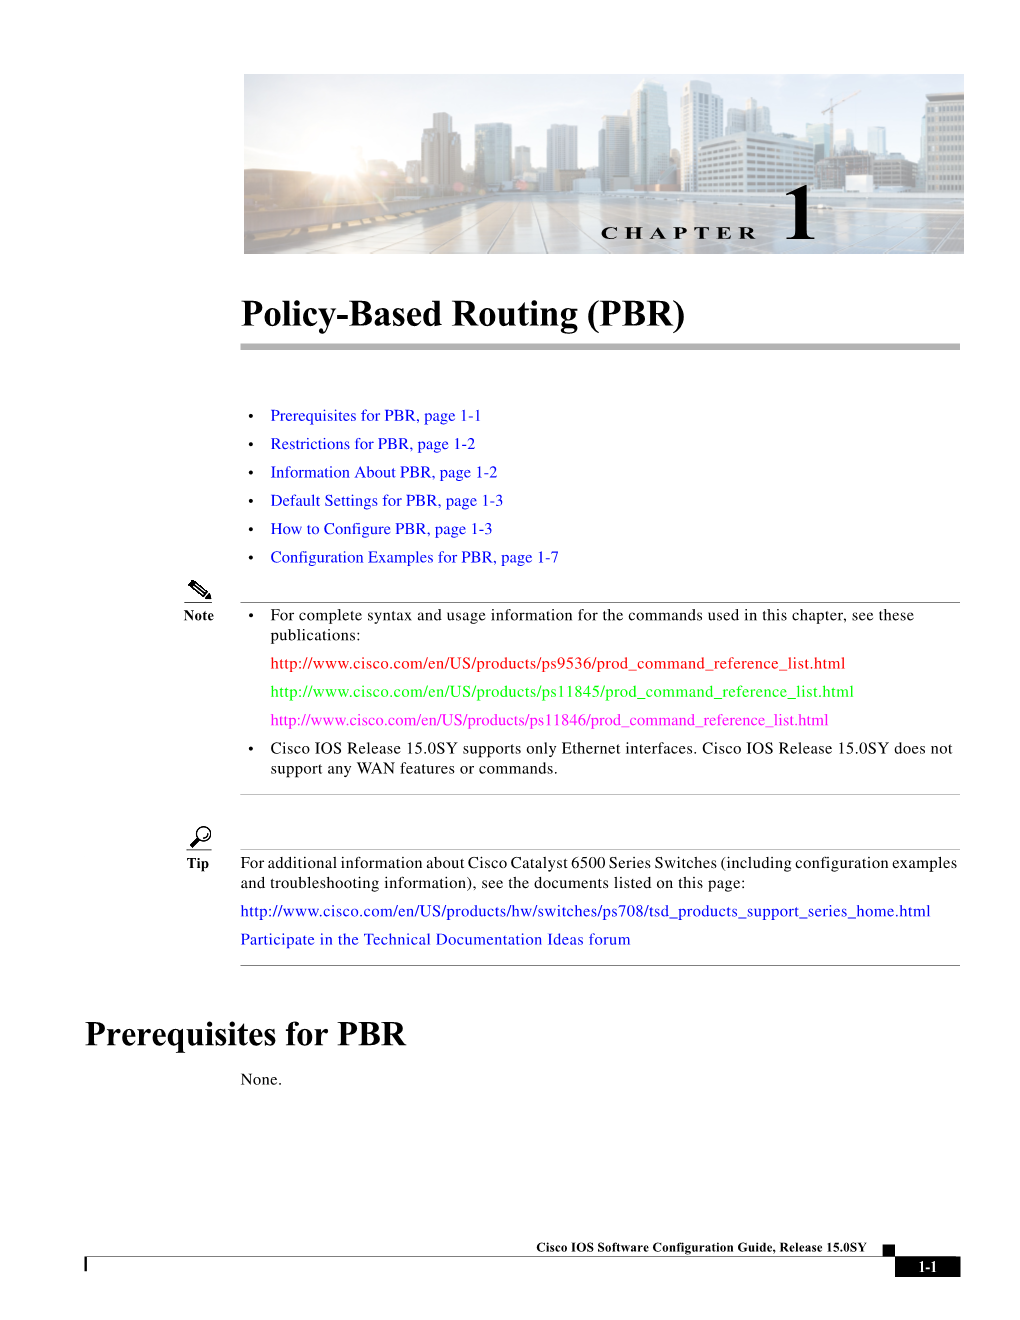 Policy Based Routing (PBR)